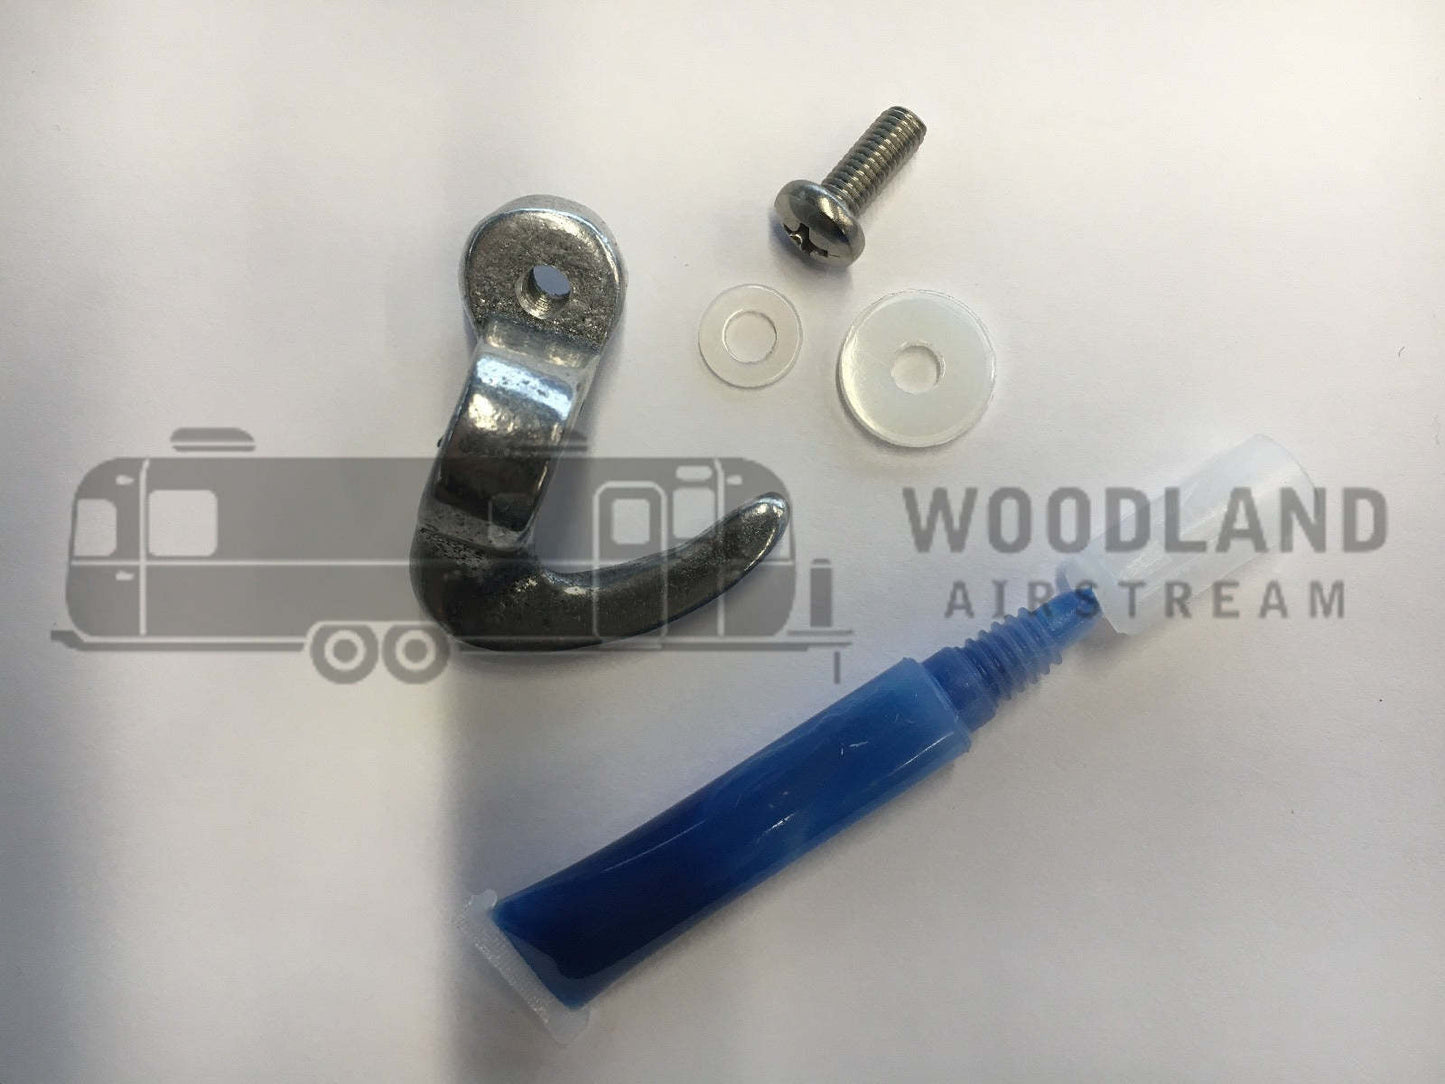 Zip Dee Window Awning Travel Latch Kit 299344 or Hook Only 210411